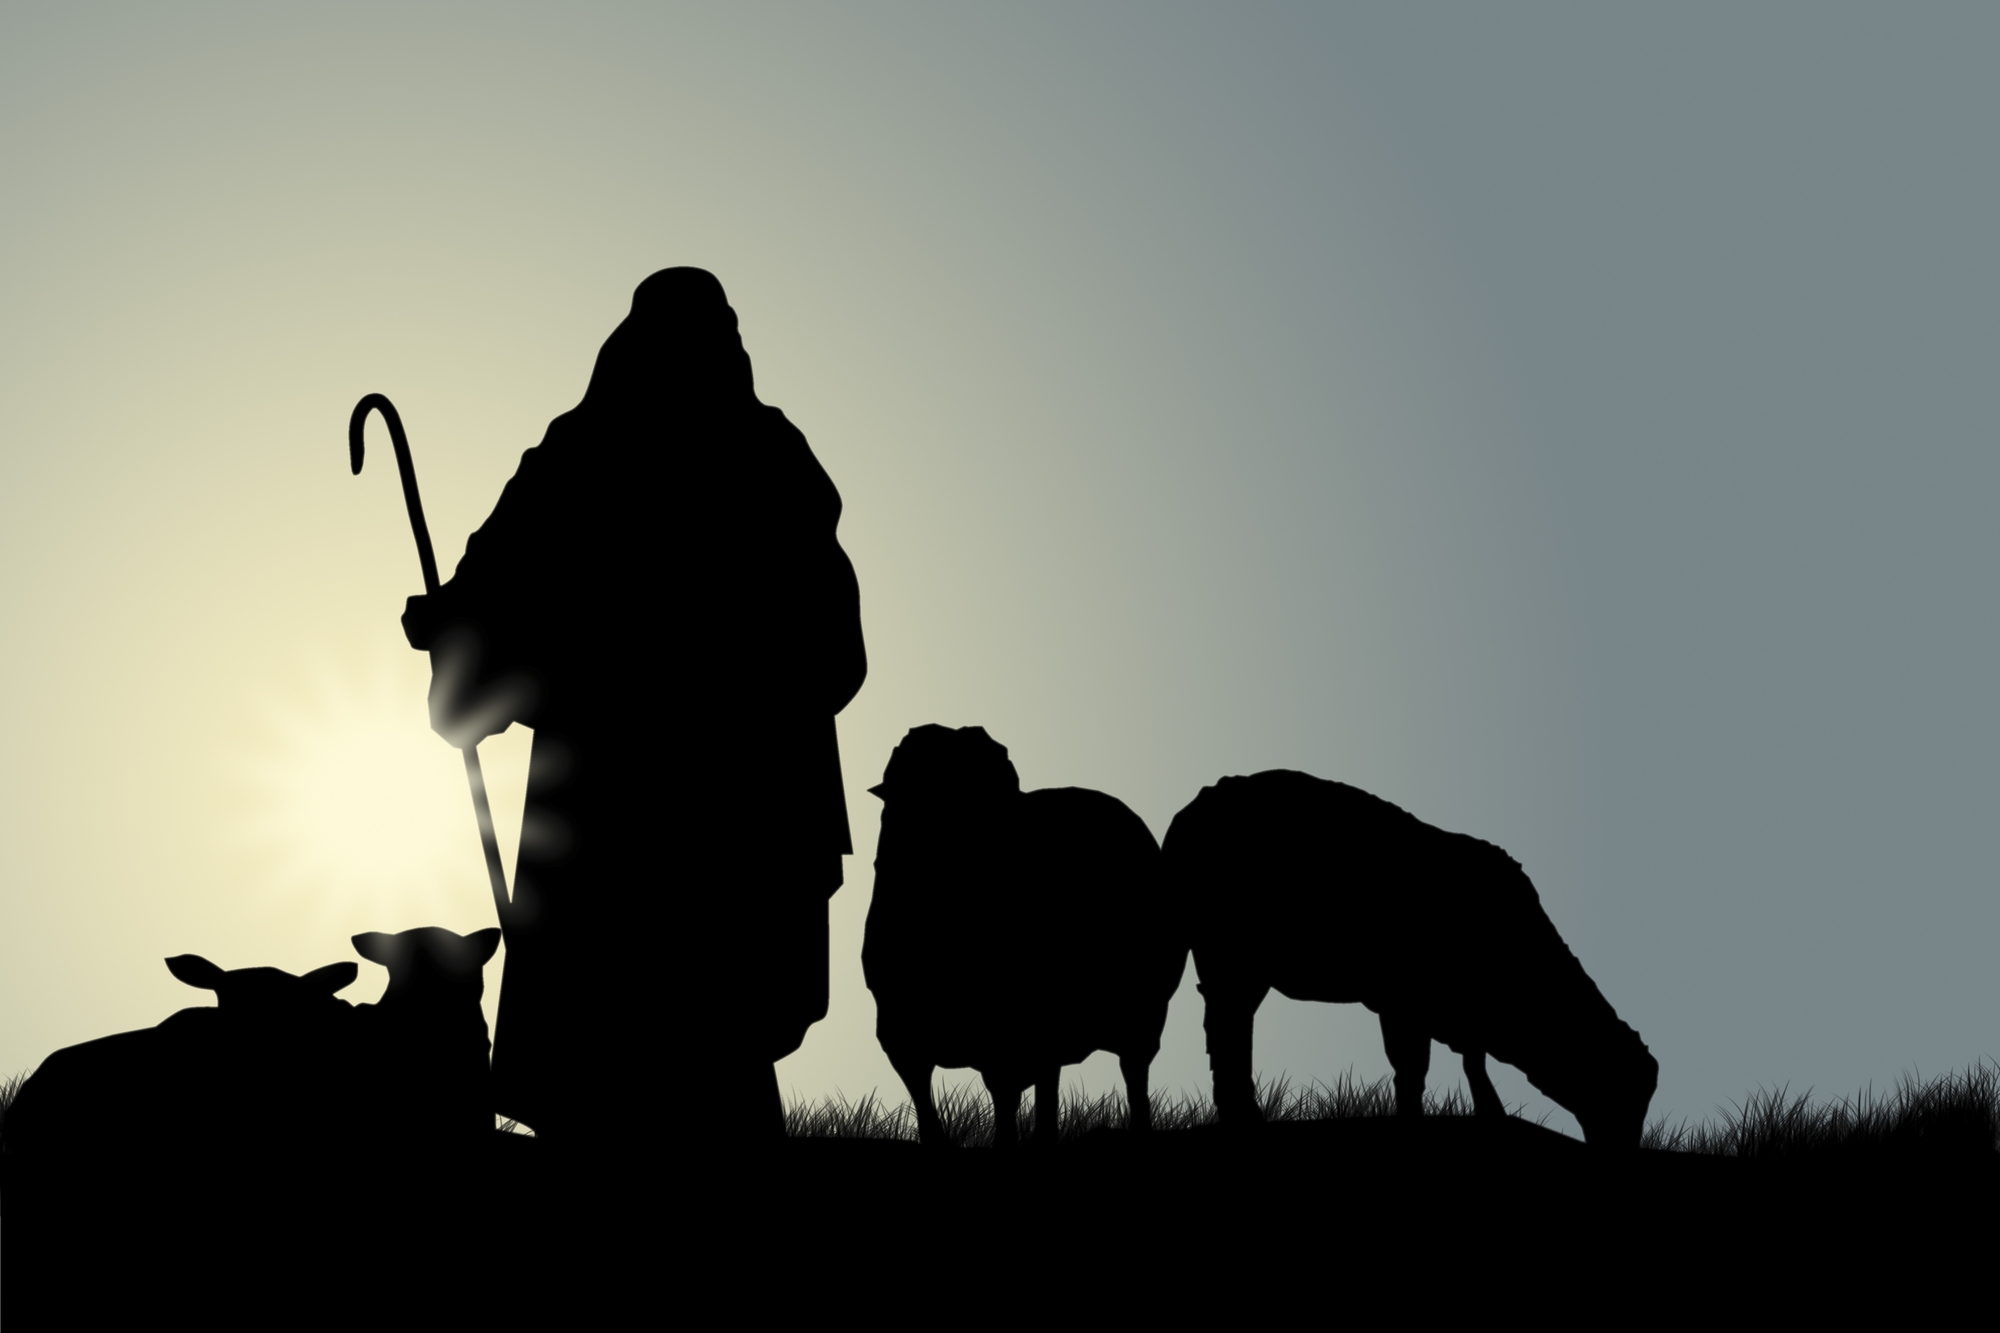 In Psalm 23, the Shepherd watches over the sheep of His fold,